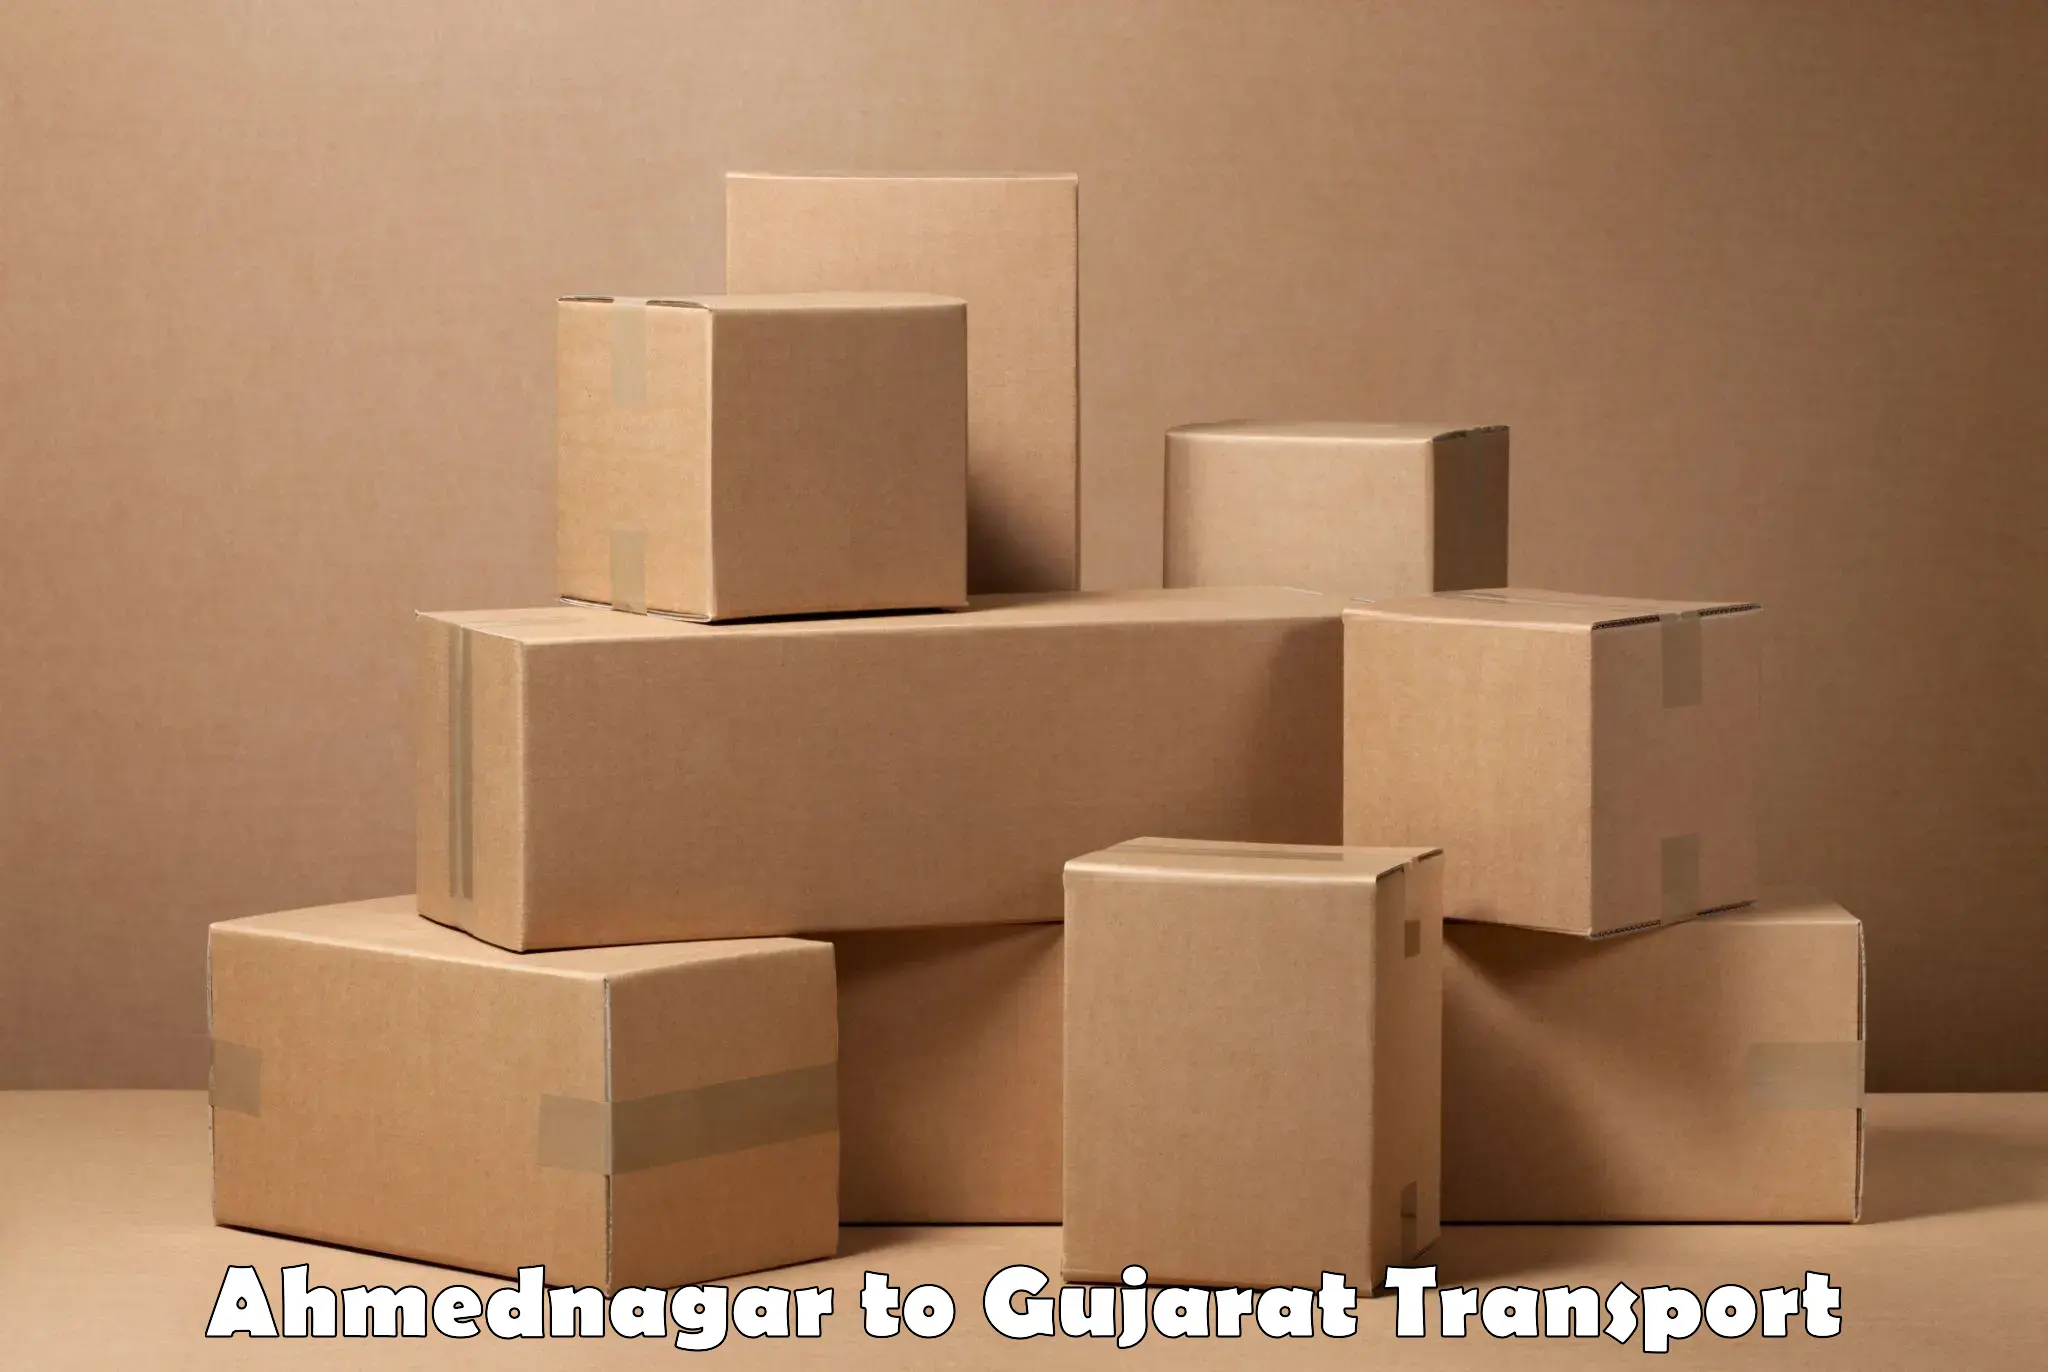 Delivery service Ahmednagar to Ahmedabad